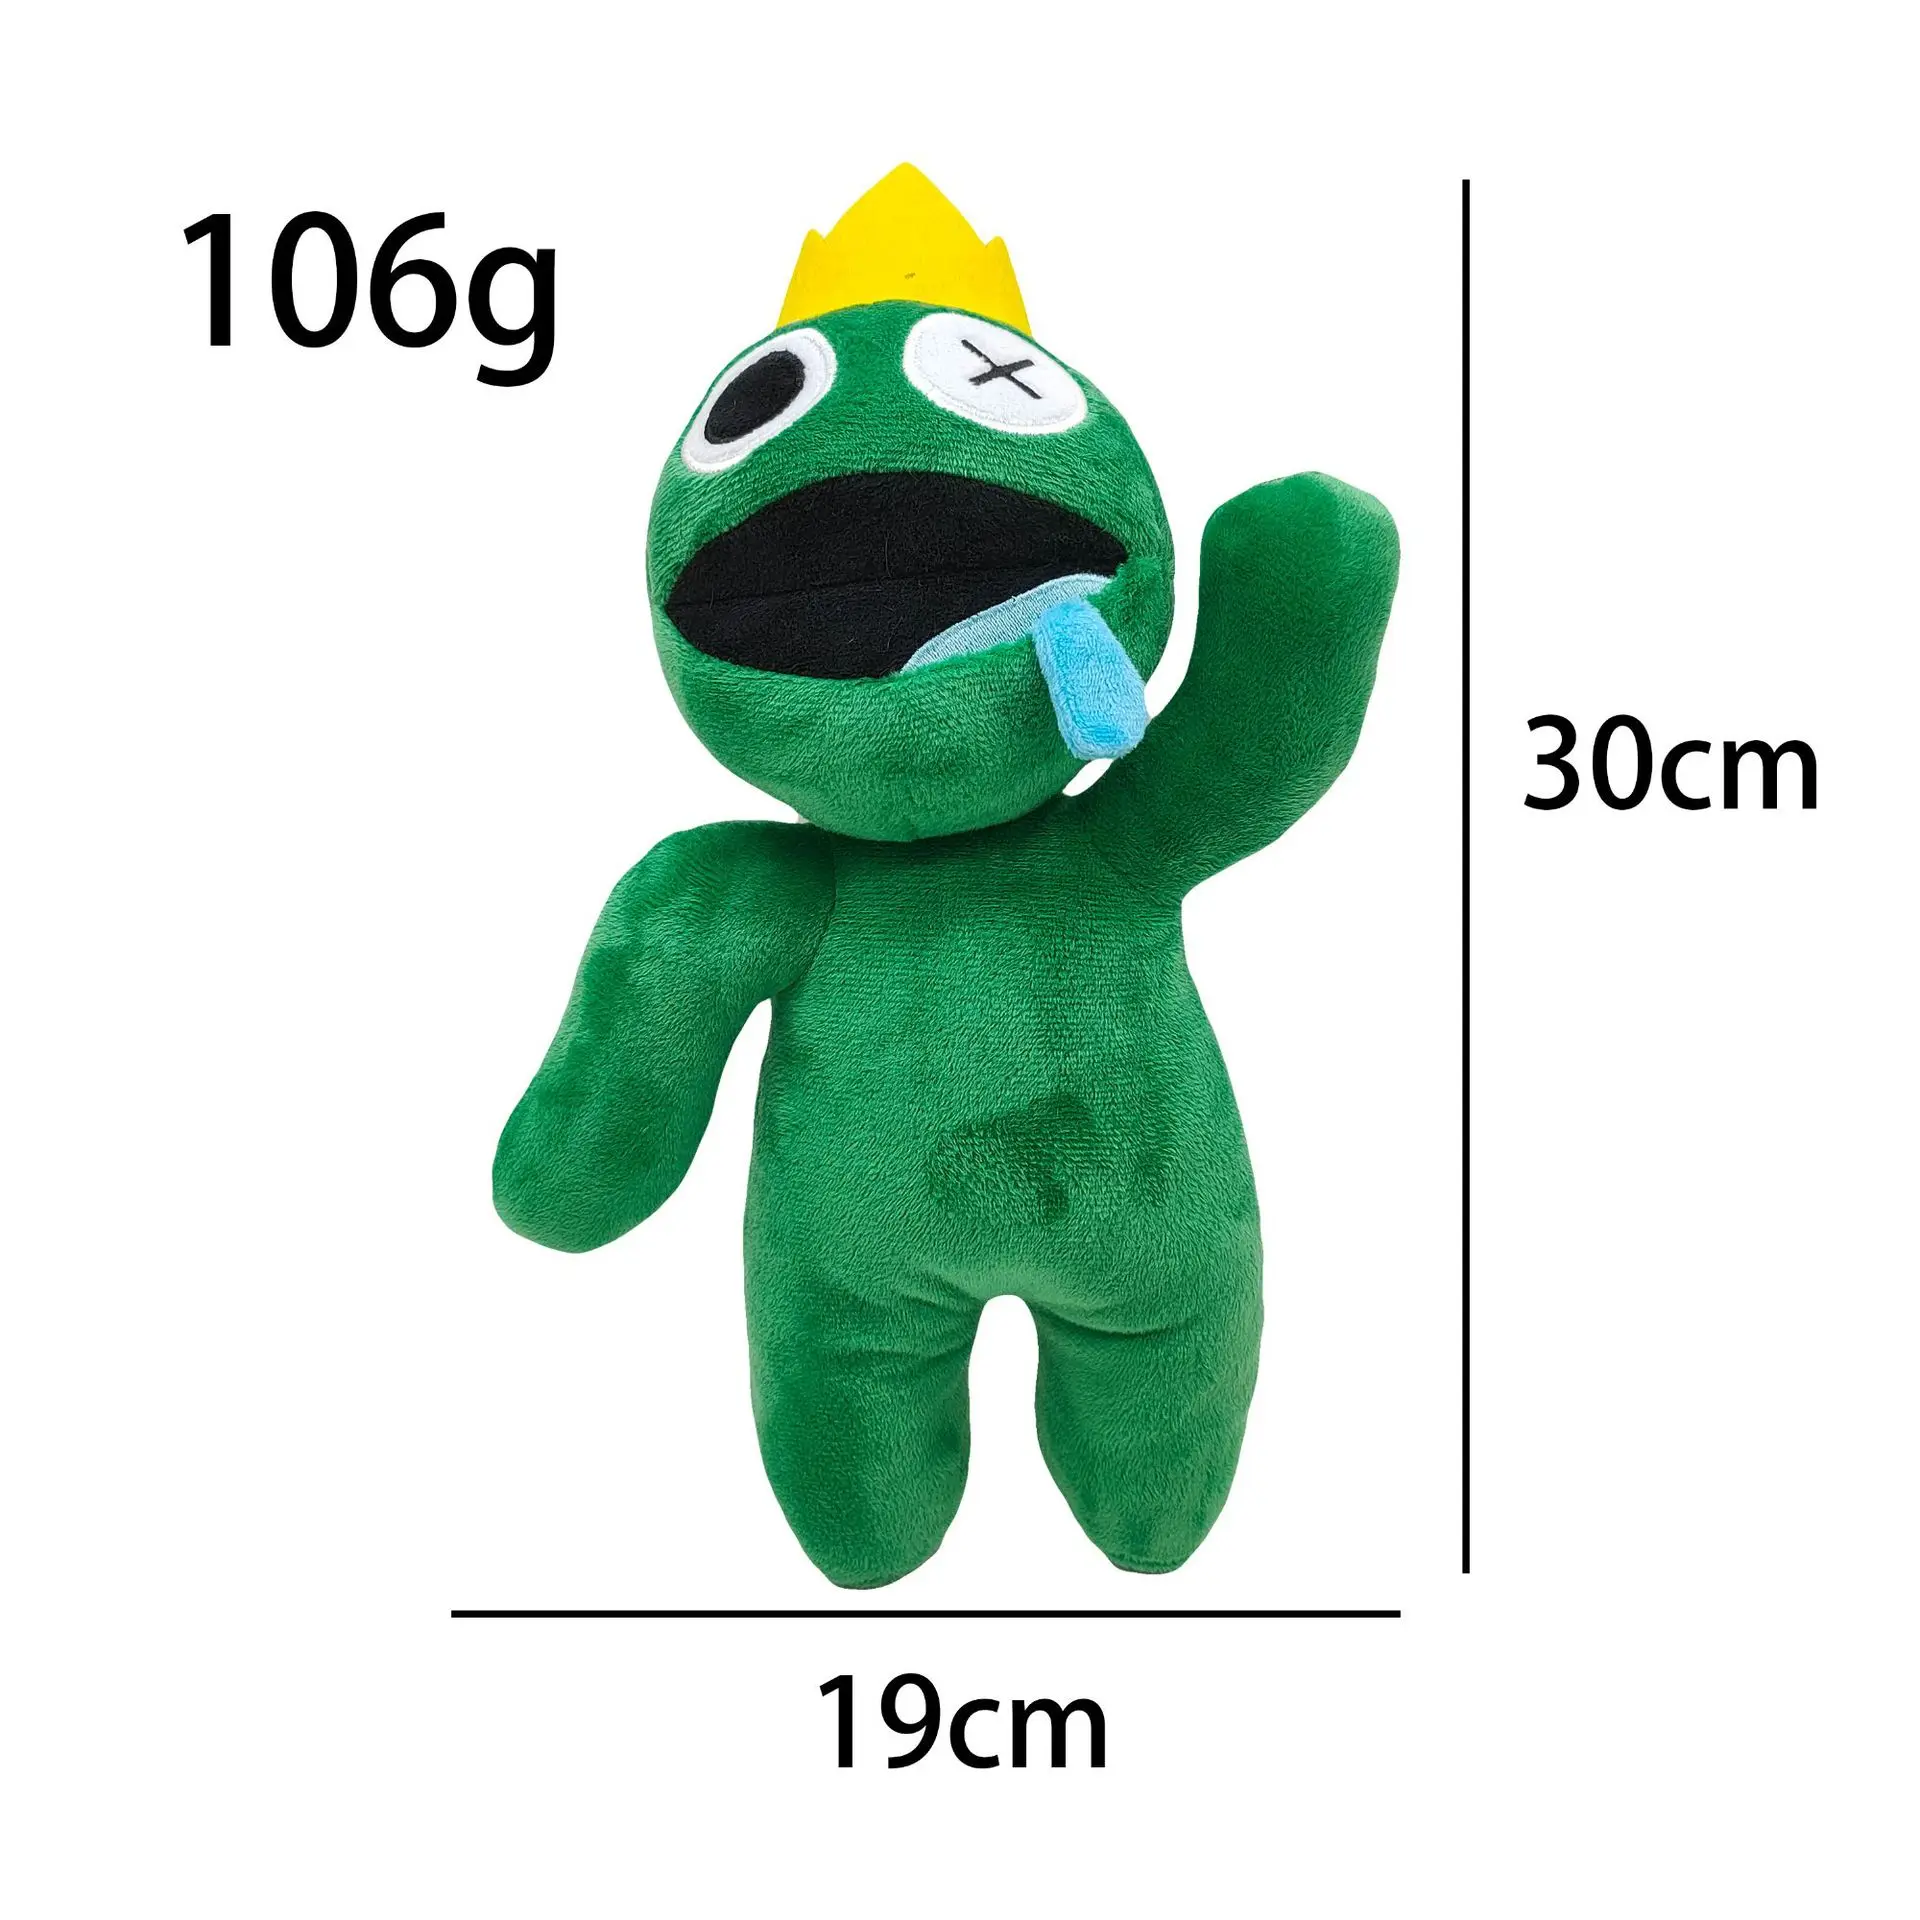 40cm Scary  Hague Vagi Stuffed Monster Halloween Gift for Children Adult Boy Gifts Poppy Playtime Game Huggy Wuggy Plush Toys